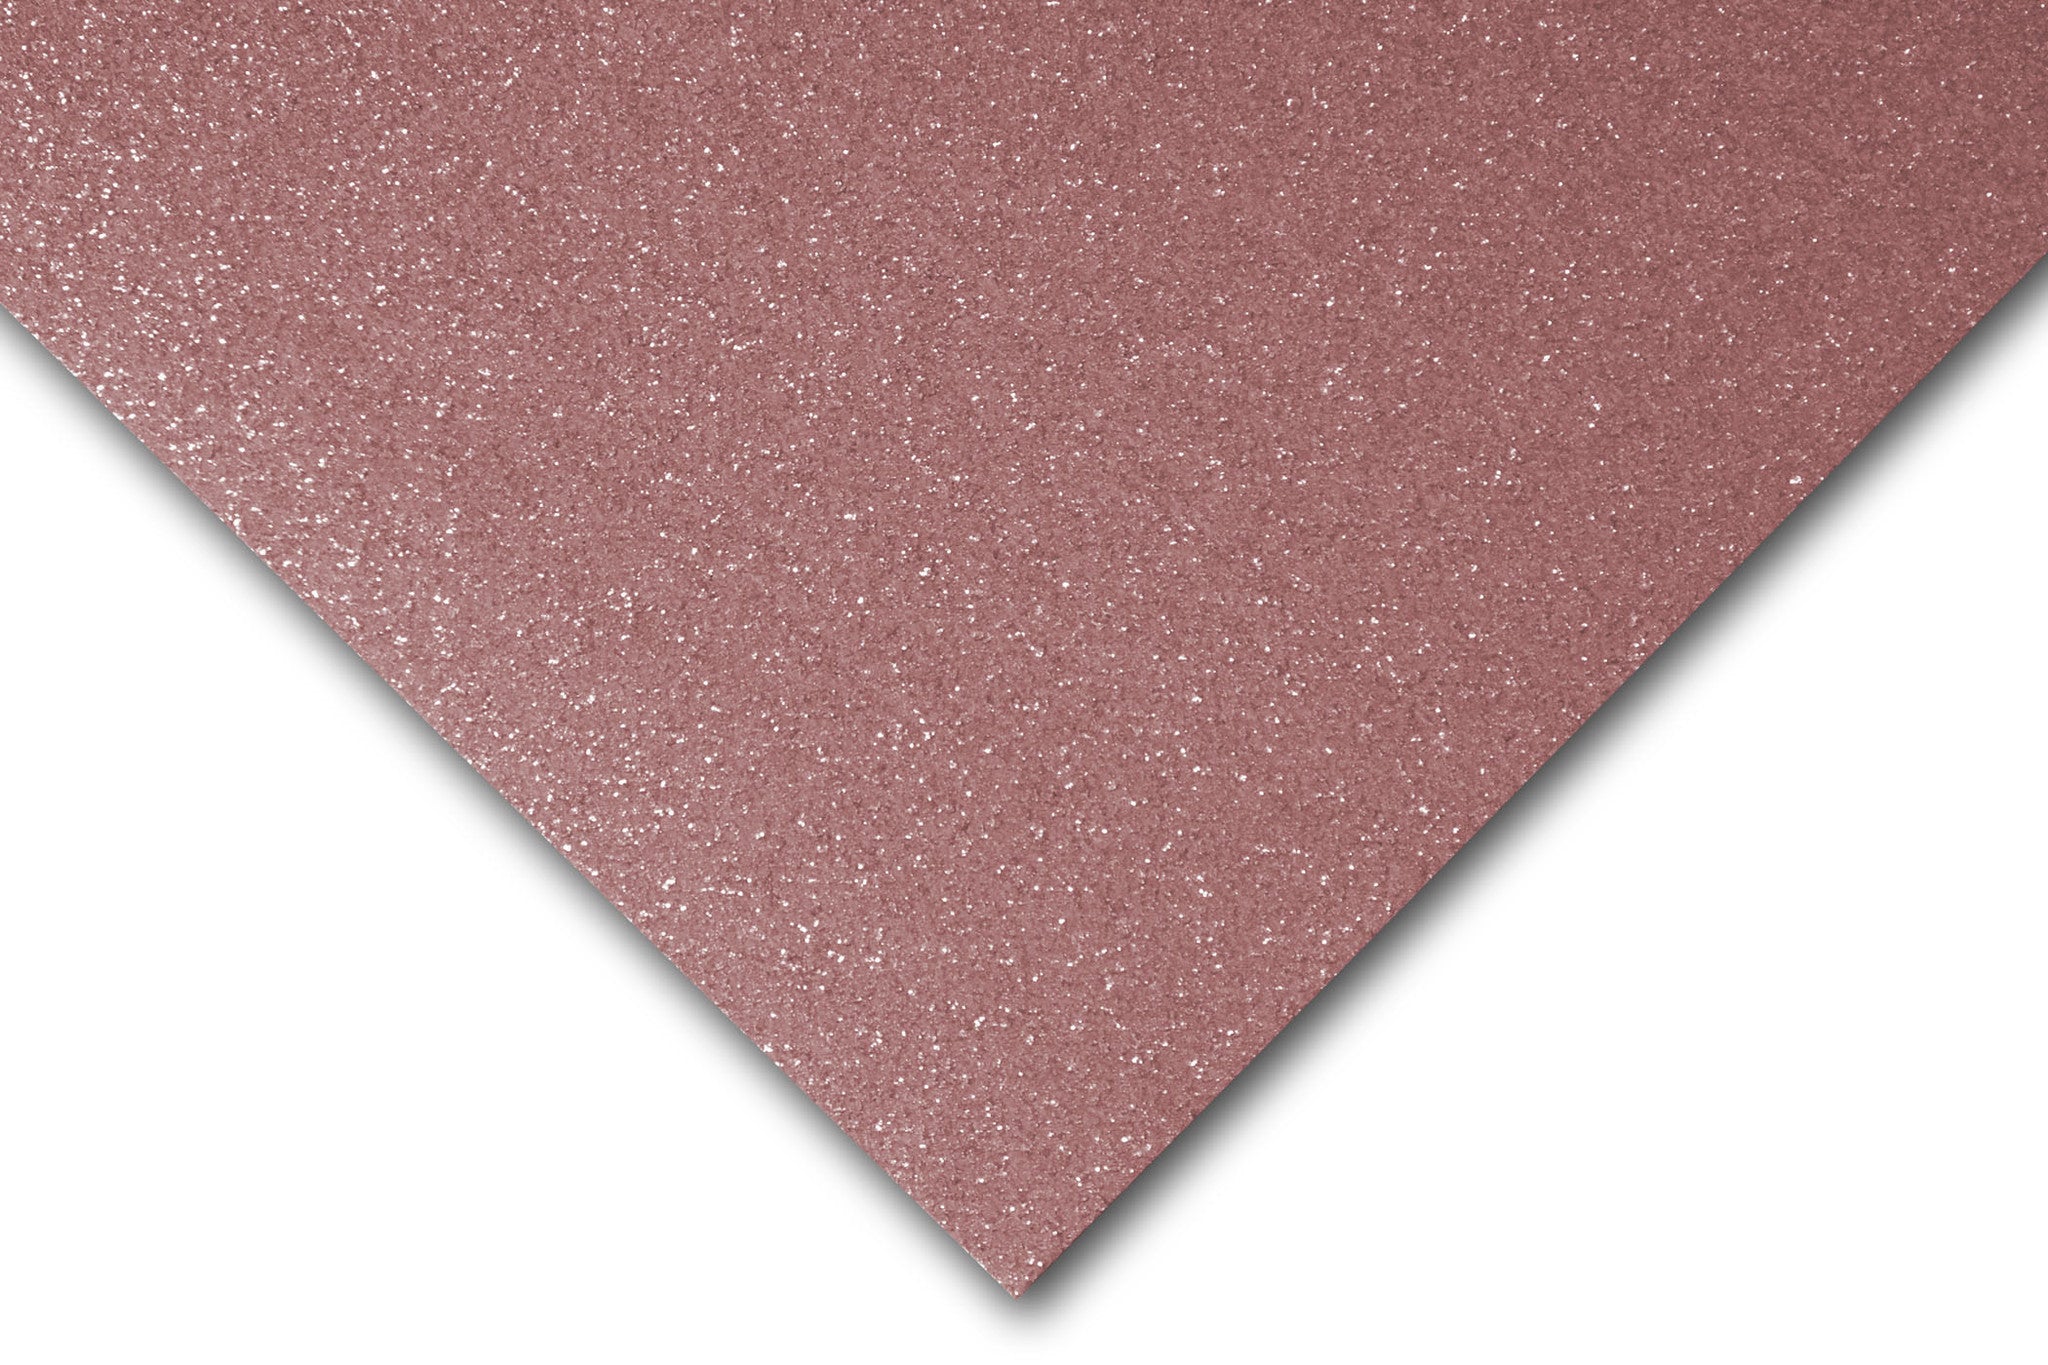 Glitter Mauve-Pink Cardstock Paper, 12x12 inches, 12-Pack, Perfect for DIY  Card Making, Wedding, Party Invitations, Scrapbooking, and More 